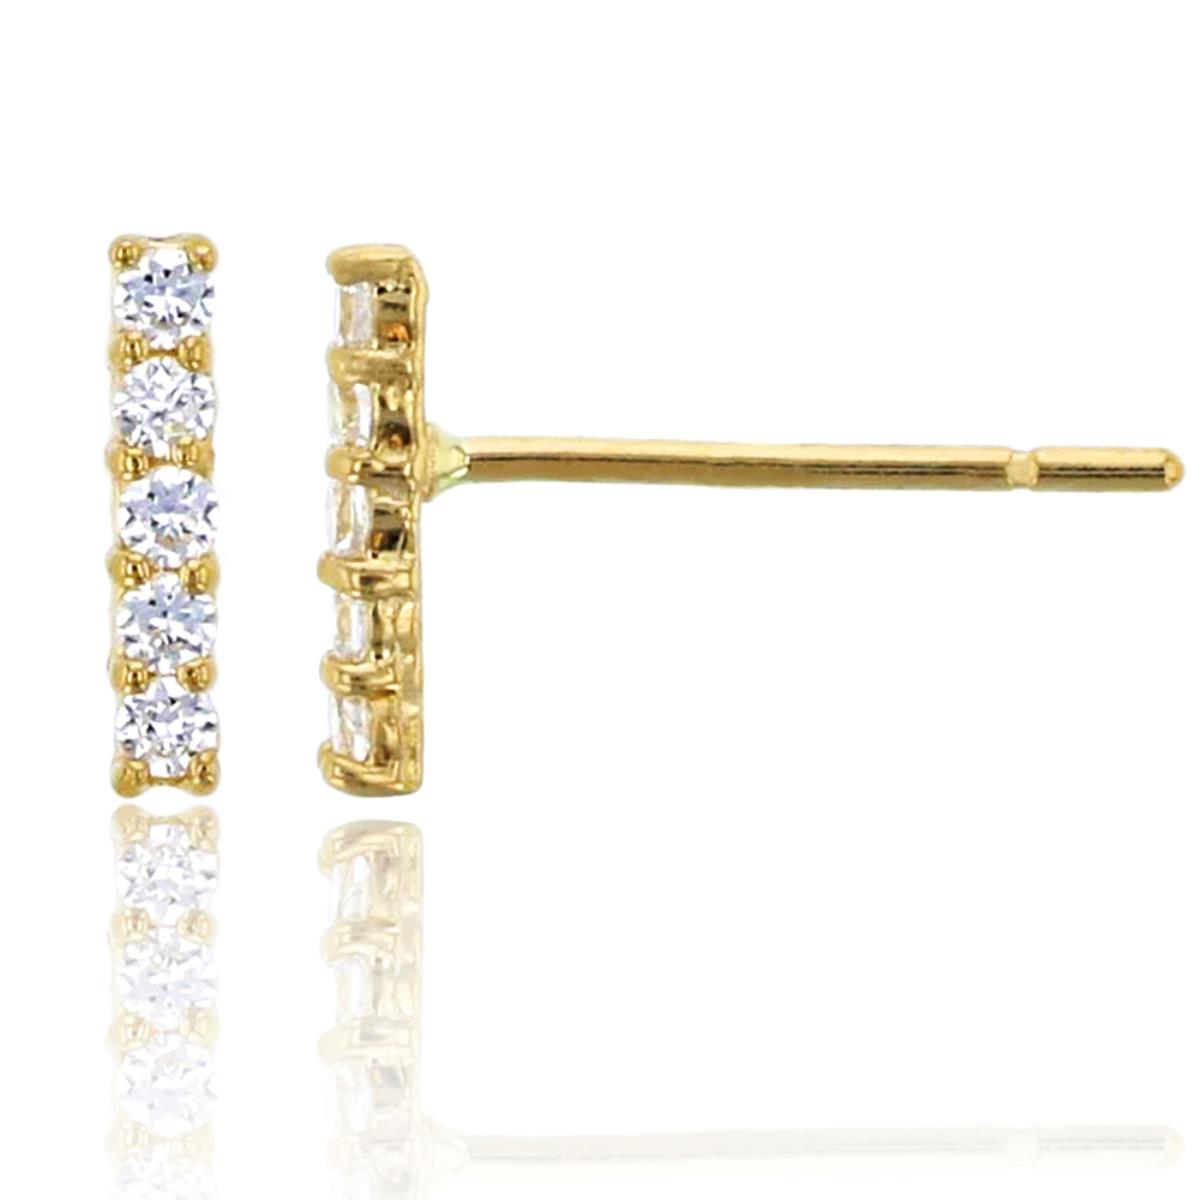 14K Yellow Gold Pave 5-Stone Liner Stud Earring